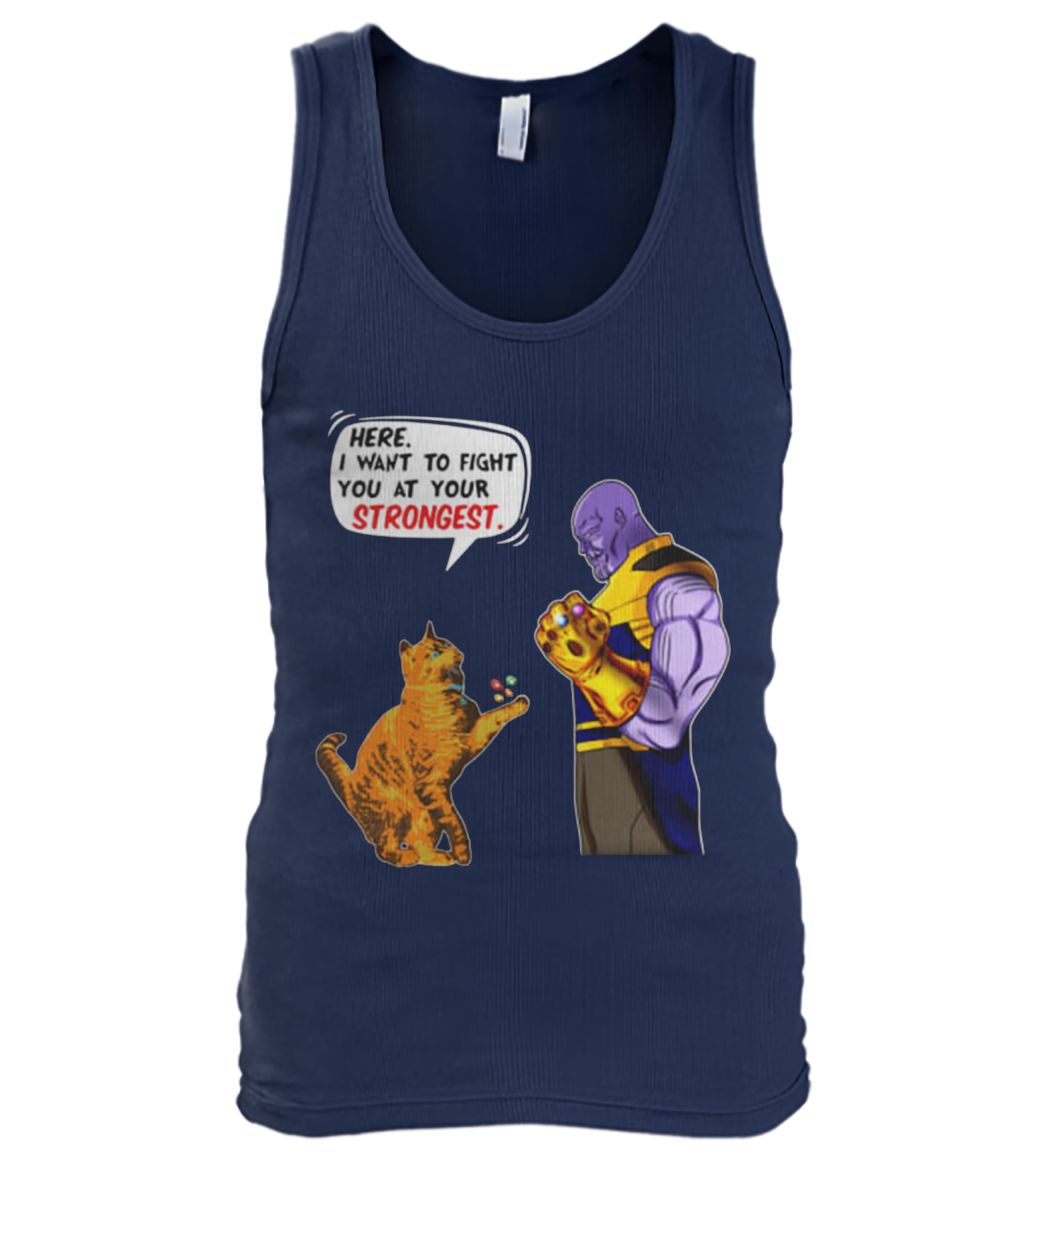 Cat Goose vs Thanos here I want to fight you at your strongest men's tank top